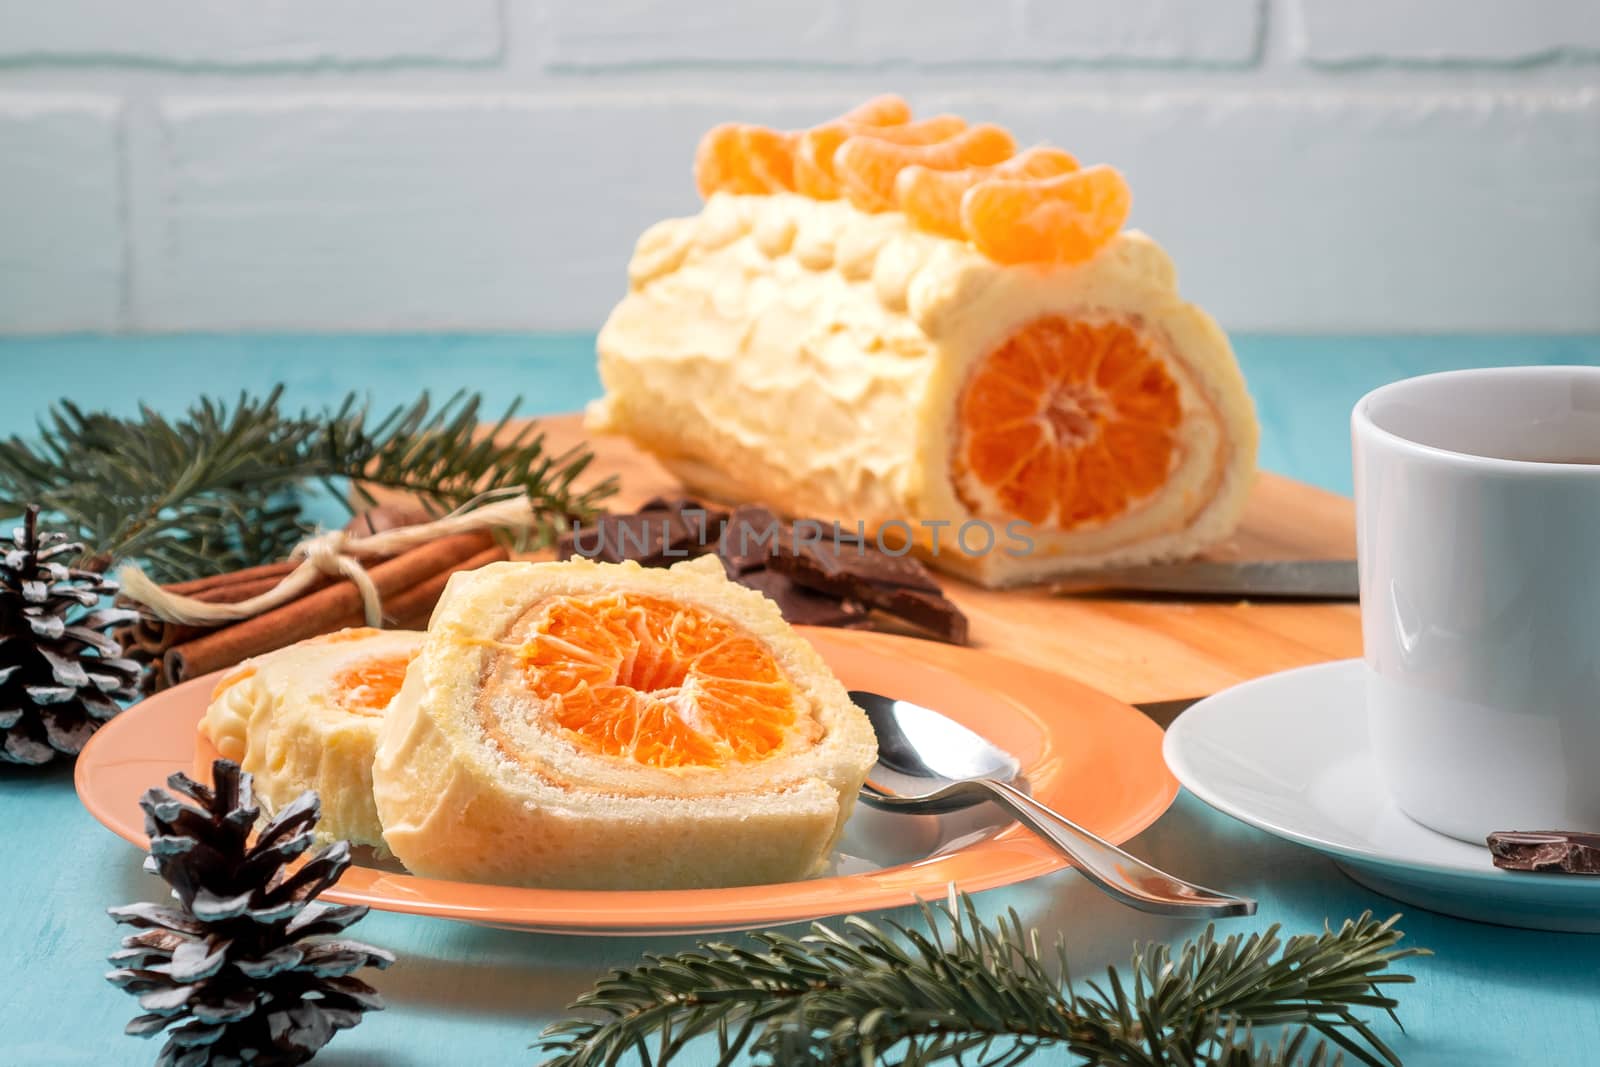 Sweet roll with whipped cream and tangerine filling and Christmas decorations.